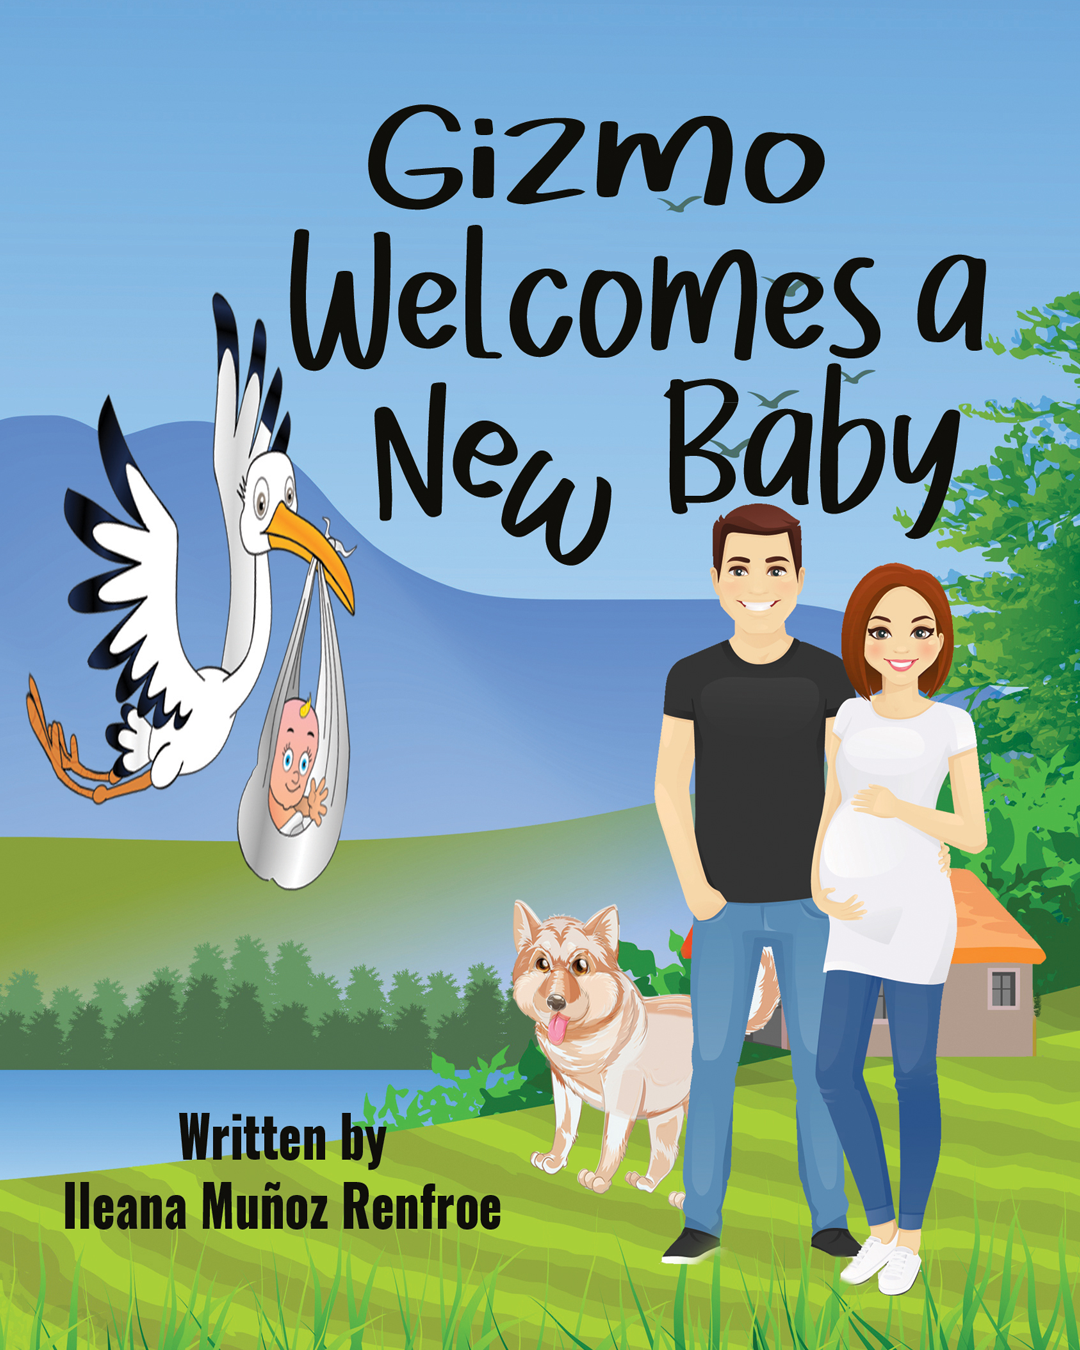 GizmoWelcomesANewBaby FBStory.png